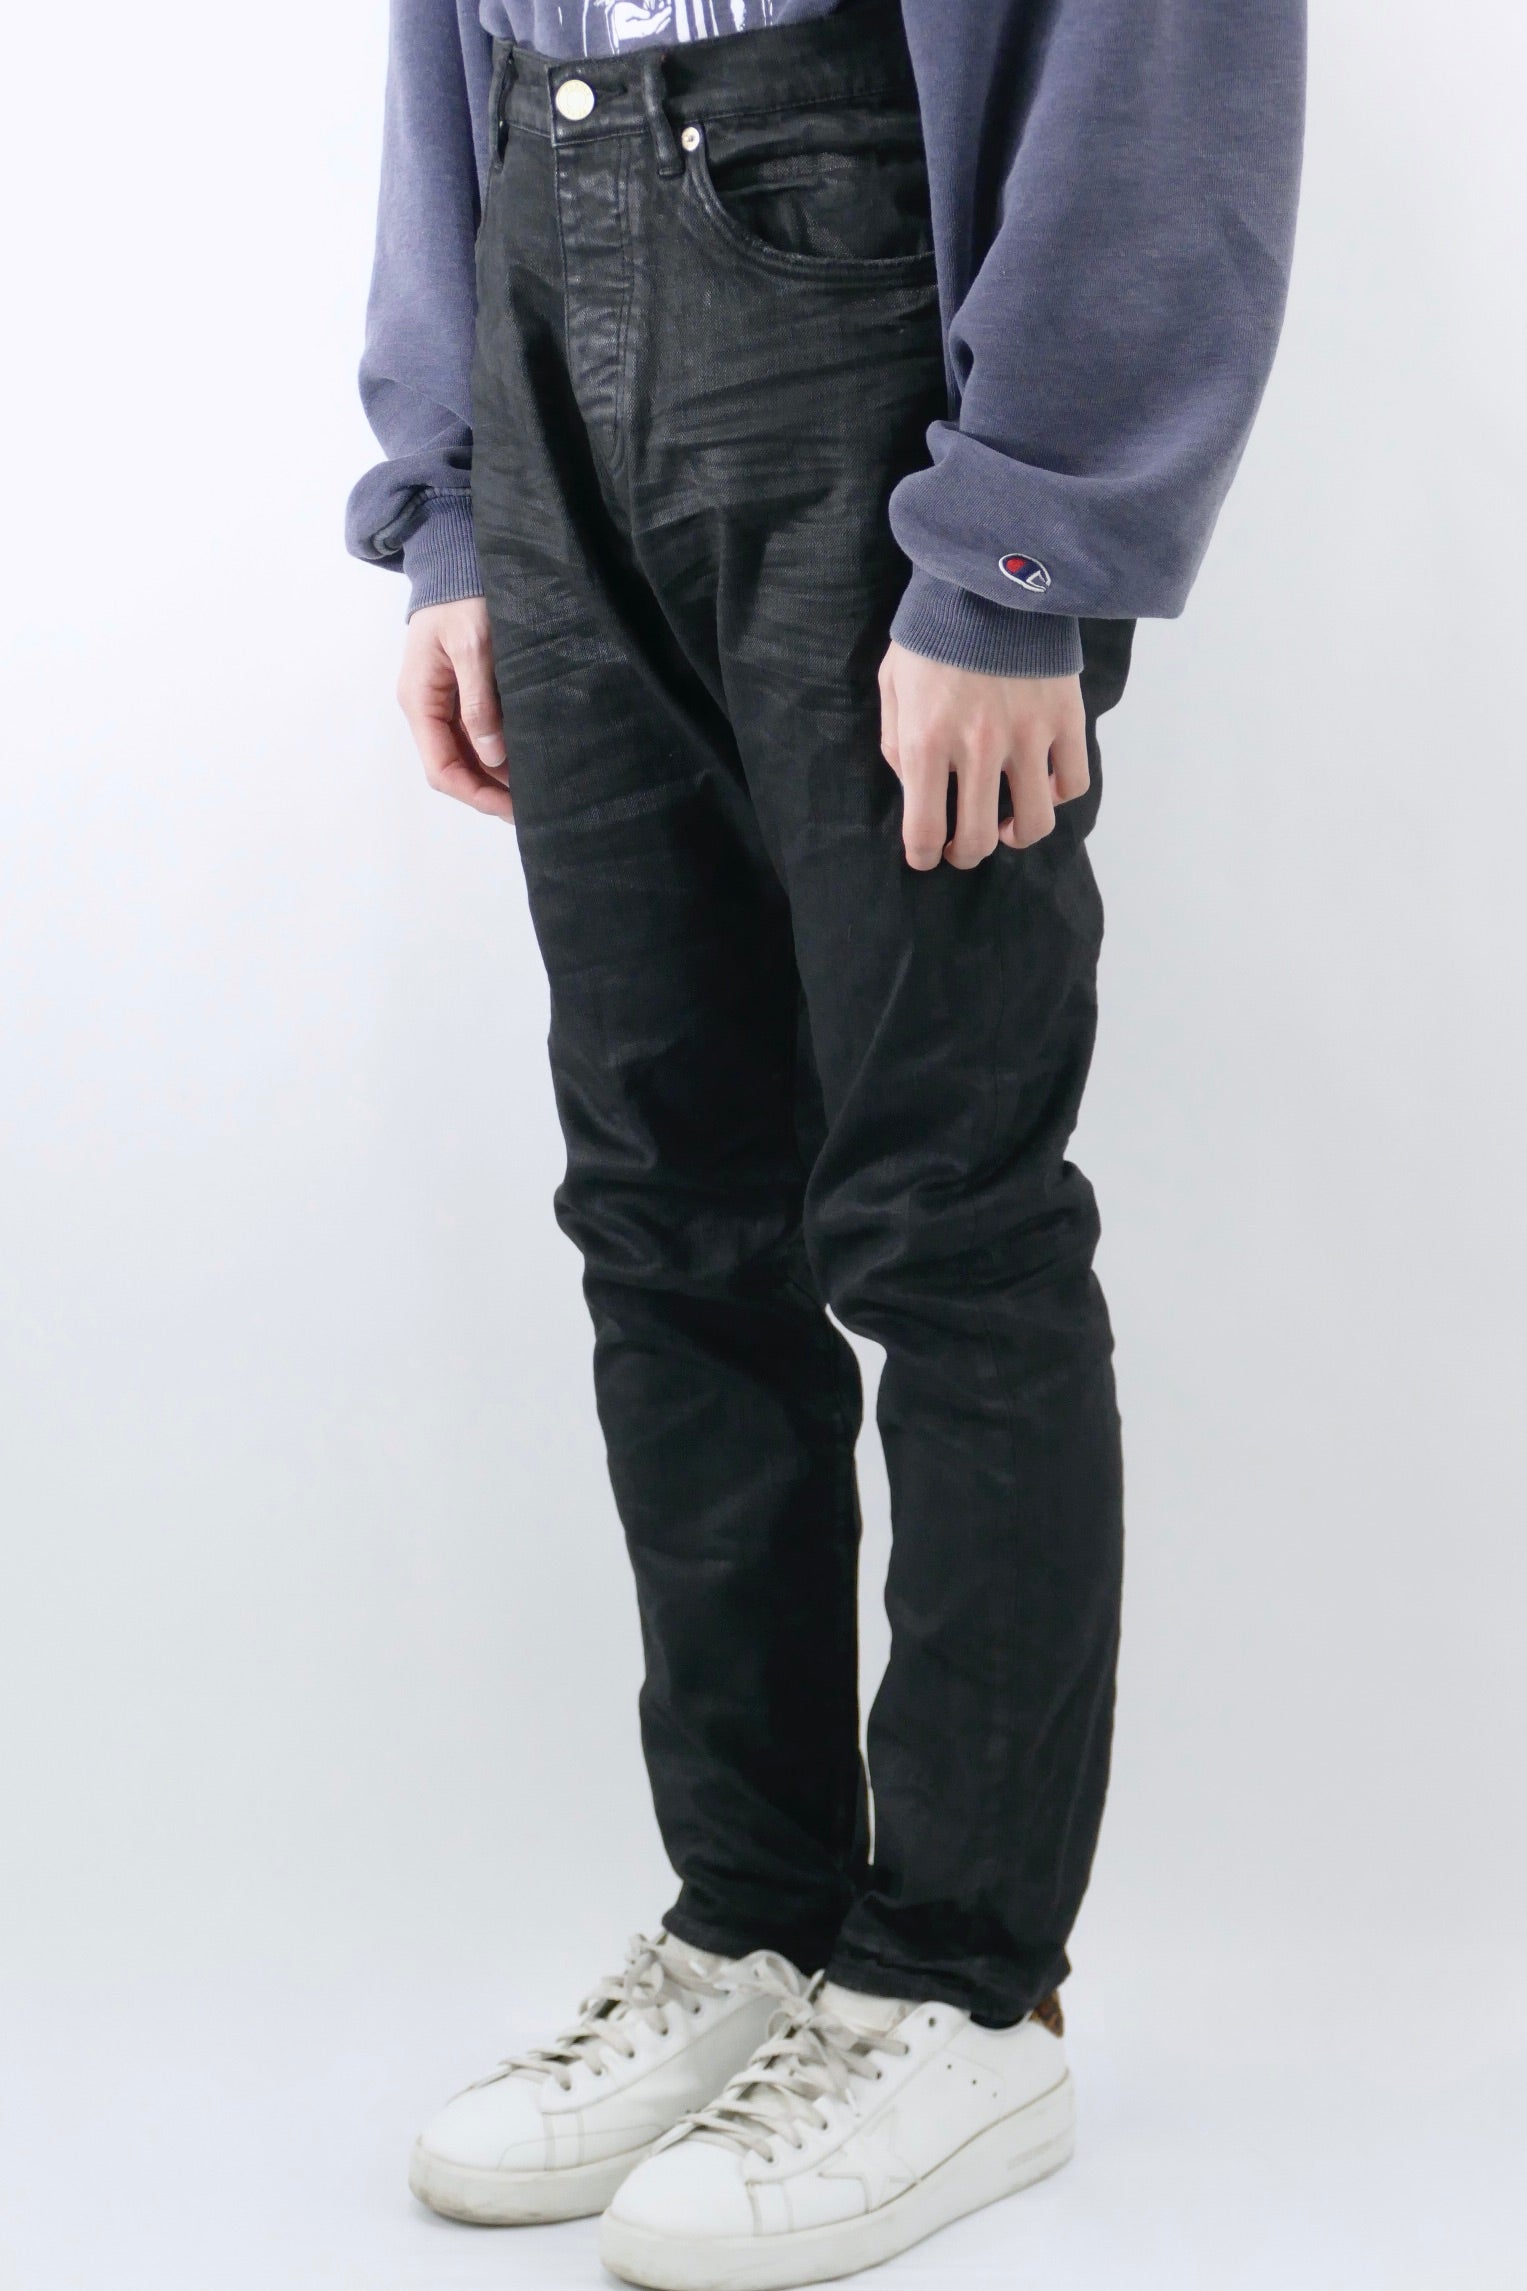 PIECES Flared Pants 'Pam' in Dark Grey